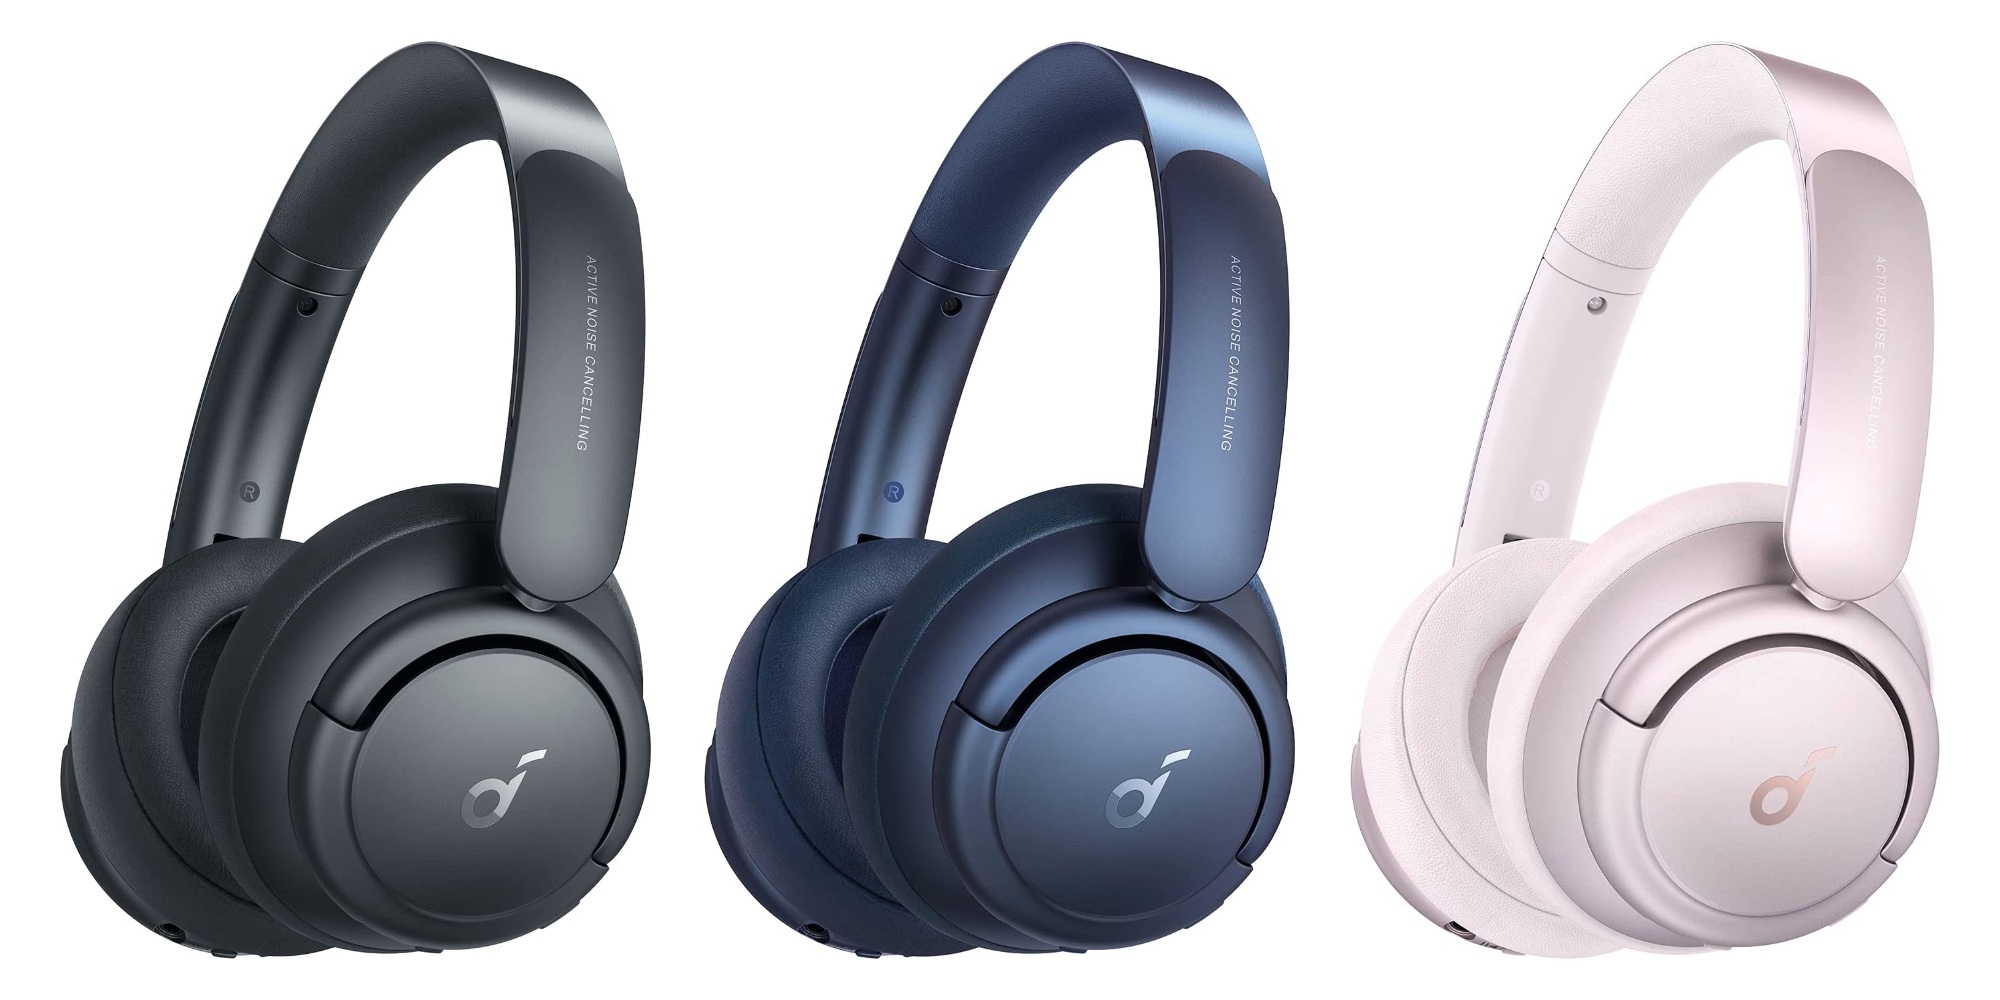 Anker Soundcore Life Q35 ANC Headphones come in three colors at $88 low  (Reg. $130)